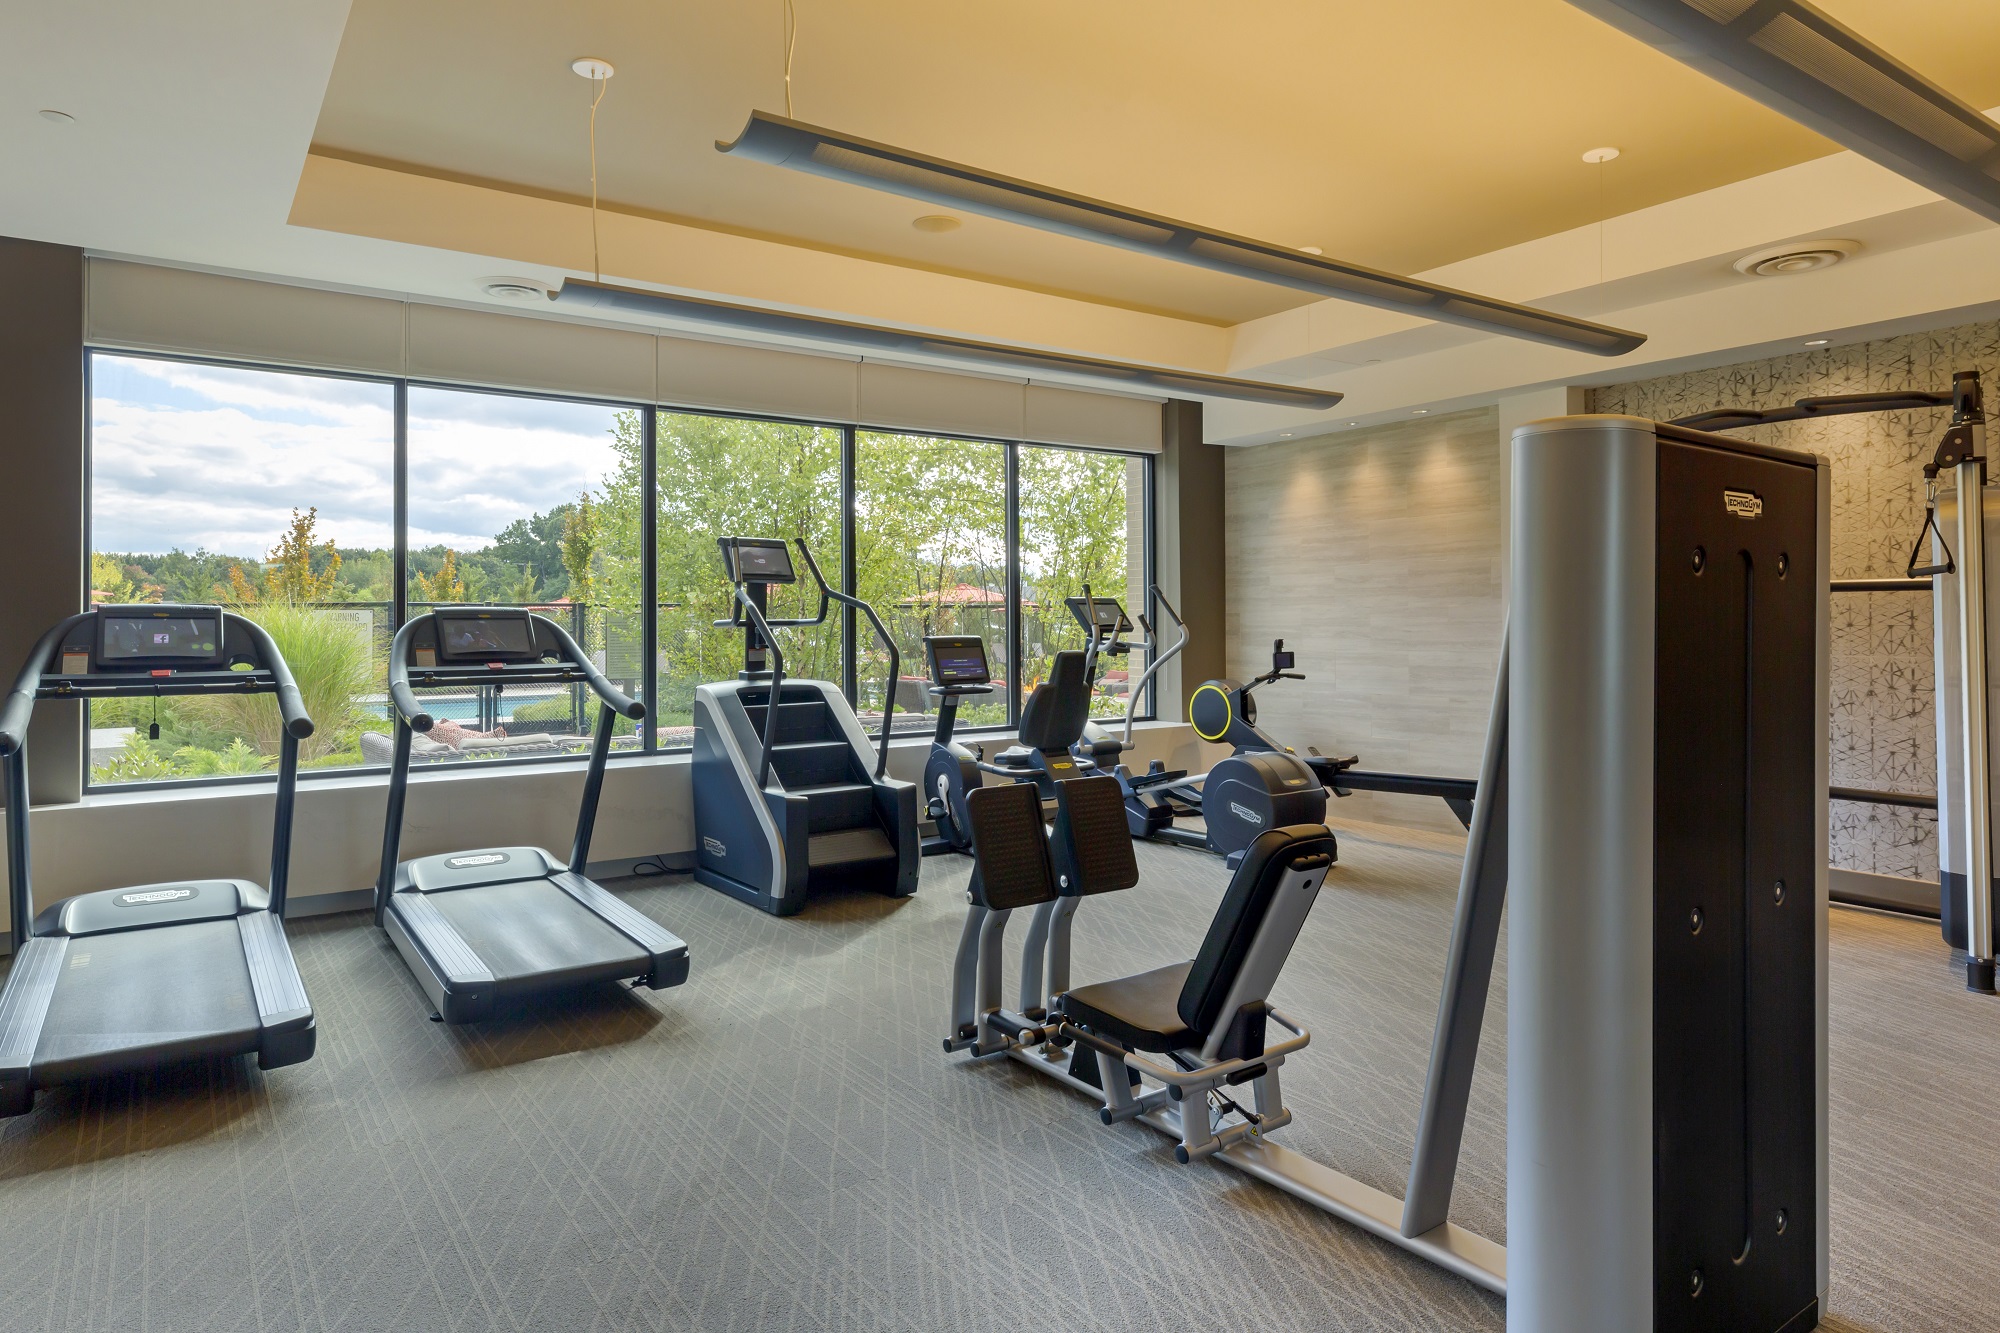 Fitness center with variety of weight machines, cardio machines, medicine balls and free weights